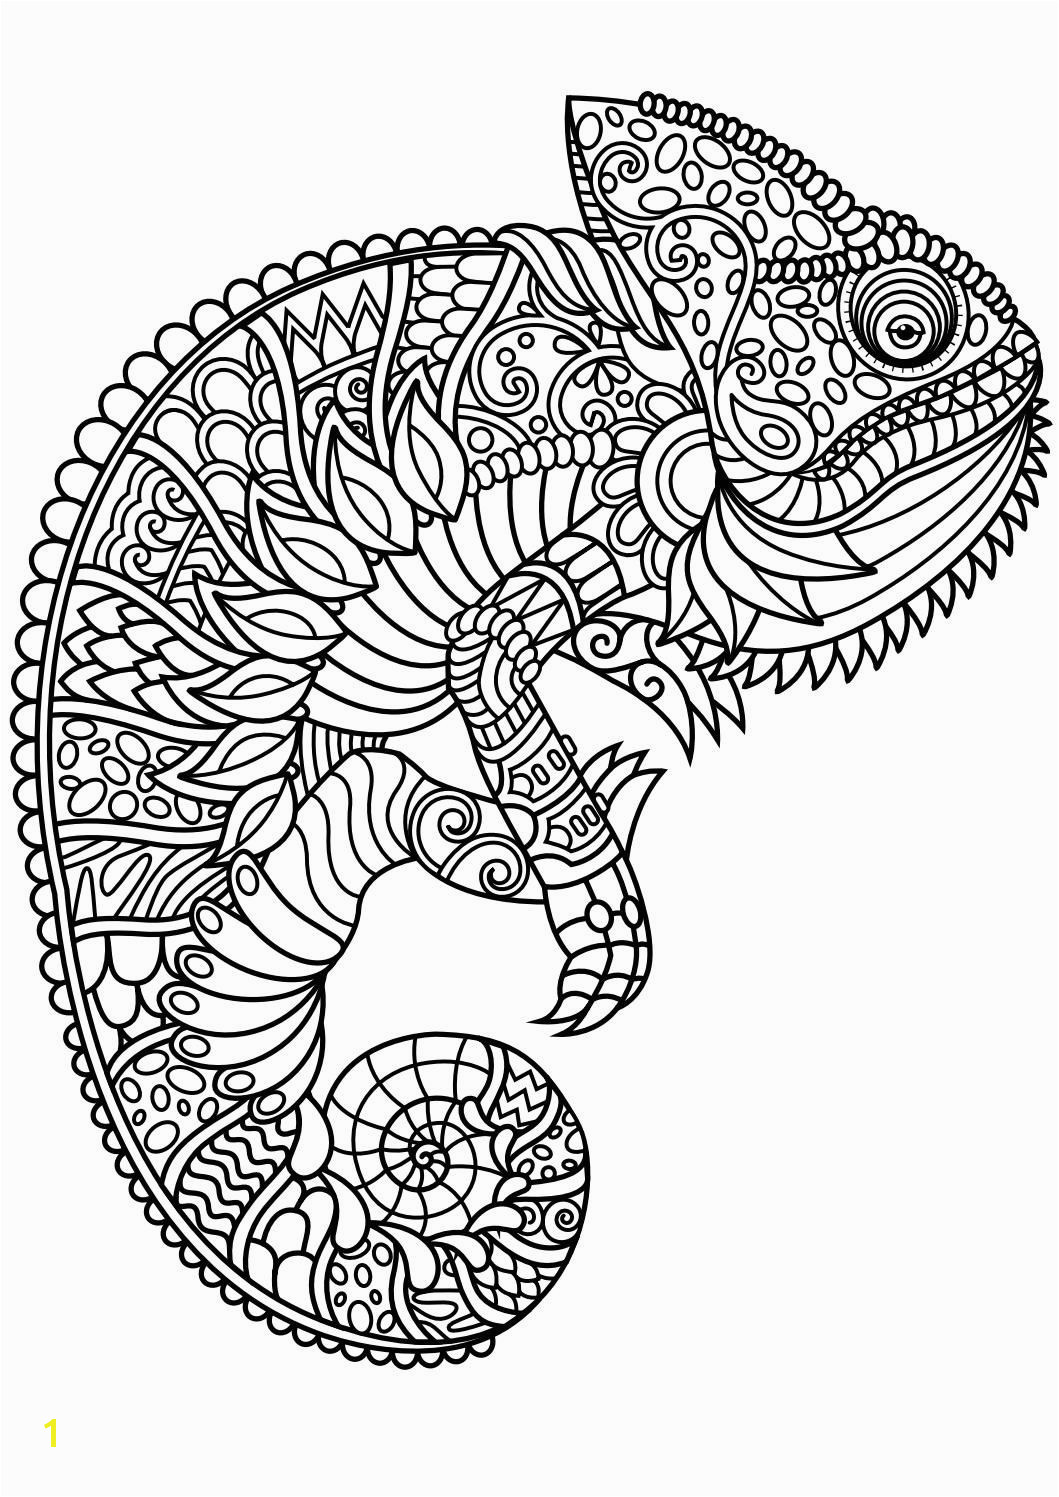 Printable Complex Coloring Pages Pdf Animal Coloring Pages Pdf Coloring Animals